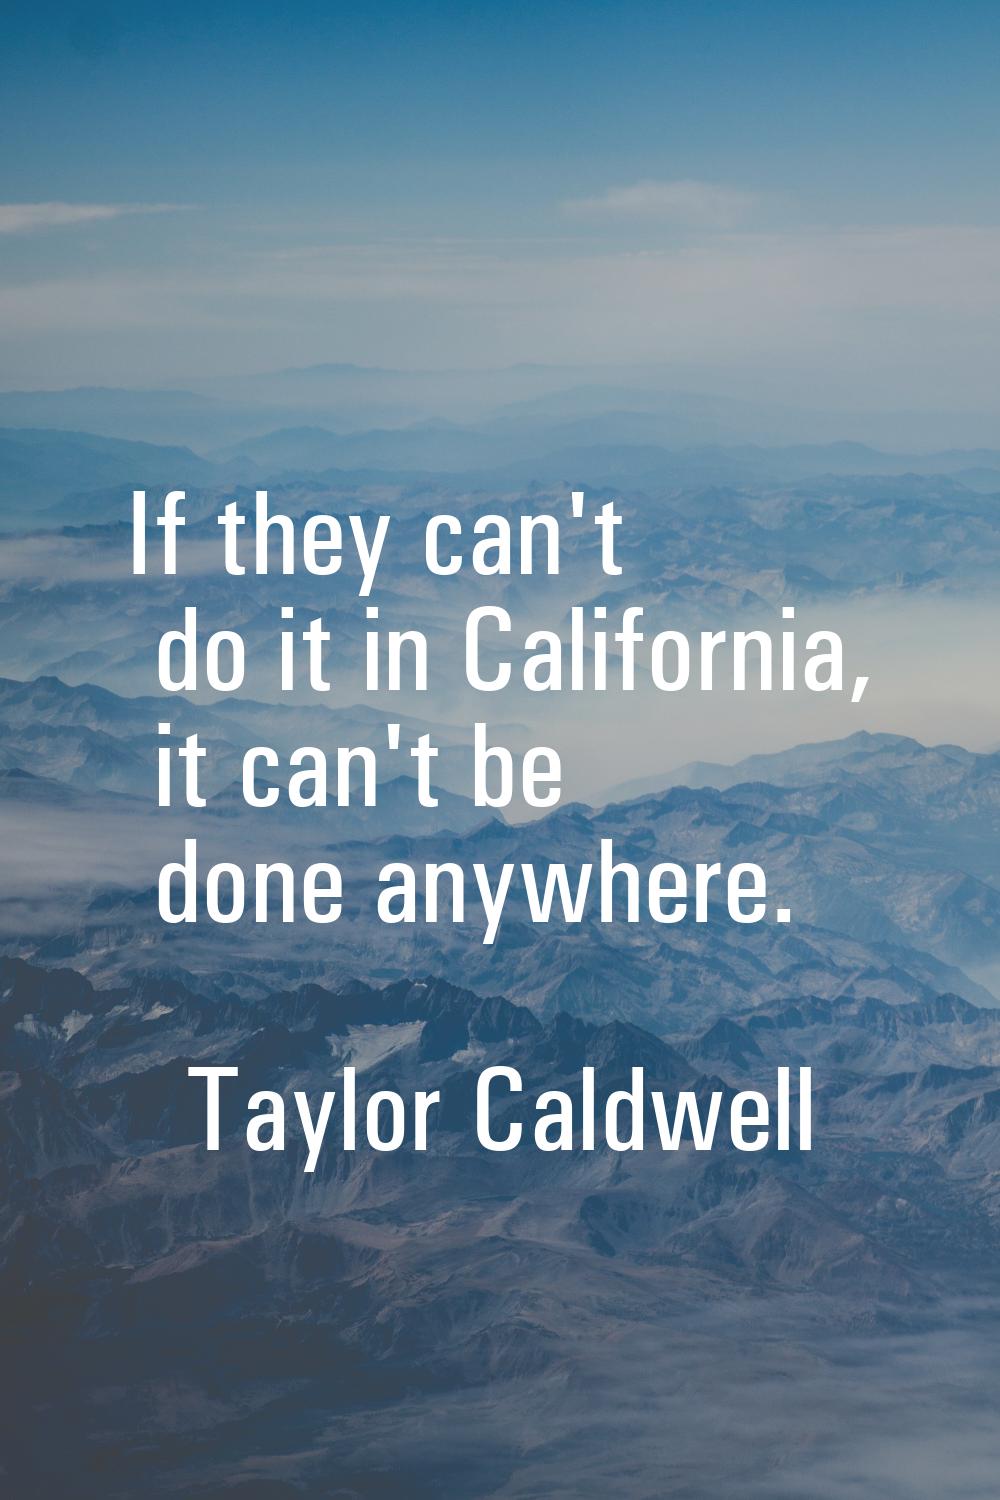 If they can't do it in California, it can't be done anywhere.